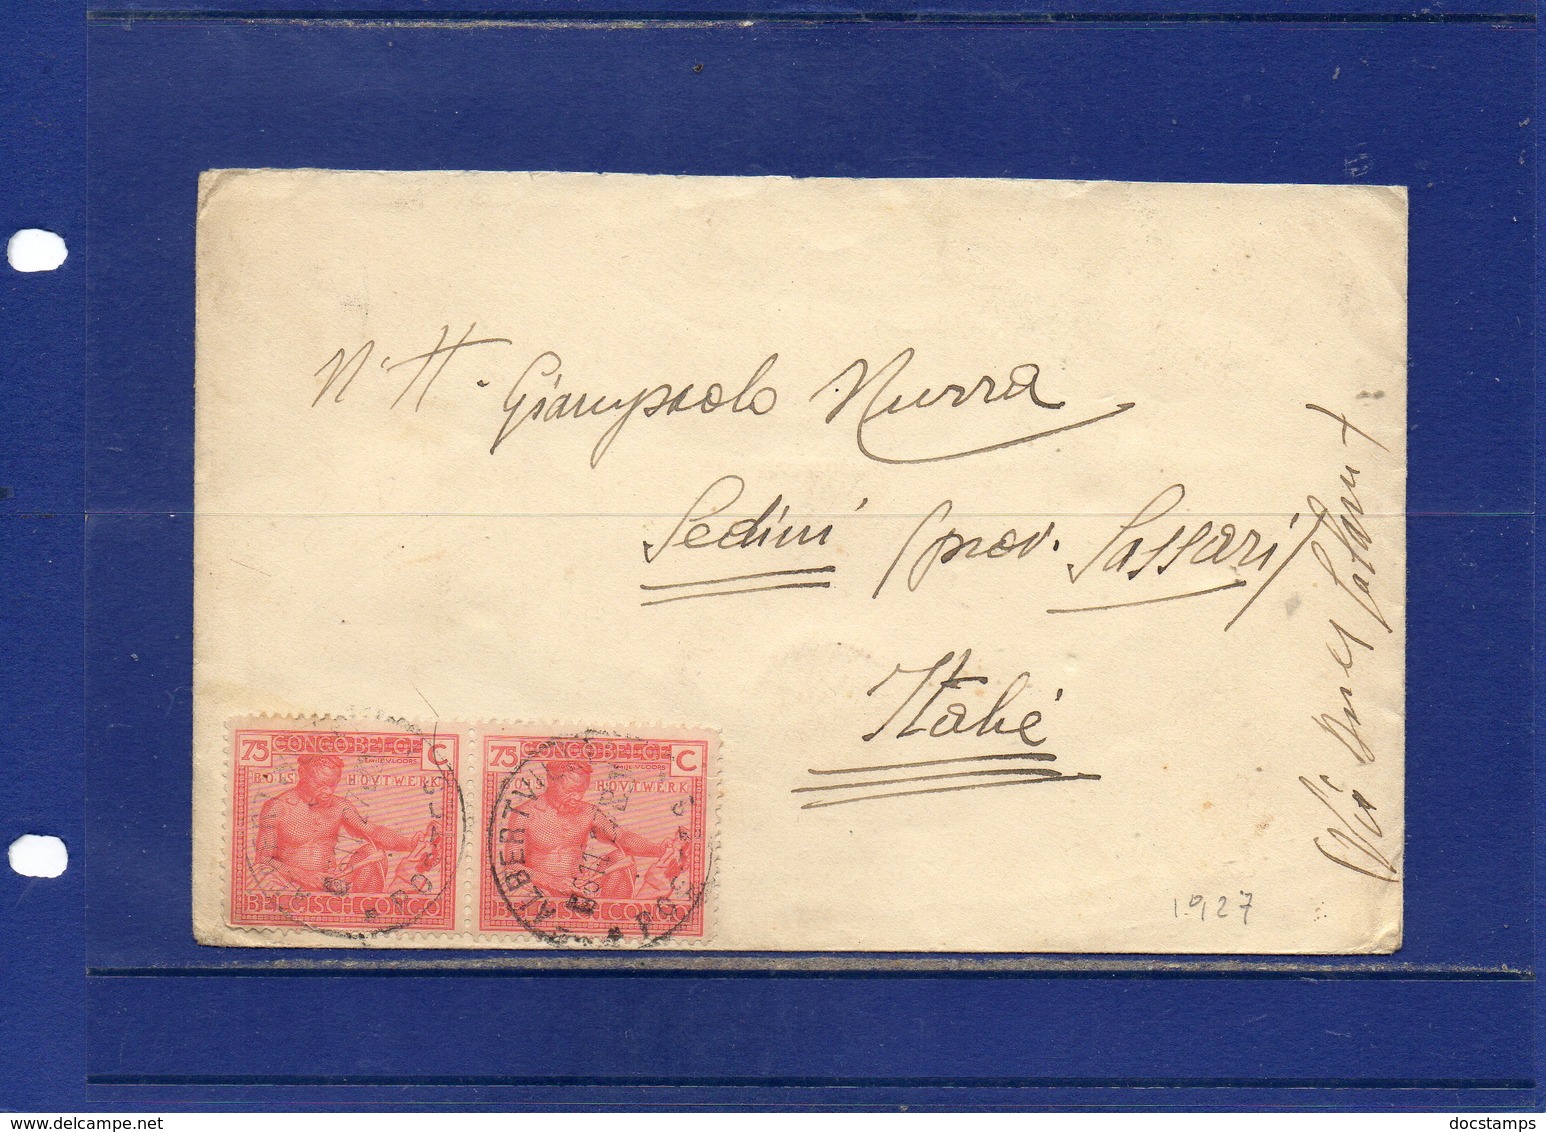 ##(ROYBOX1)-Postal History-Belgian Congo1927-Cover From Albertville To Sedini-Sassari Italy, Stamps Affixed On Back - Storia Postale